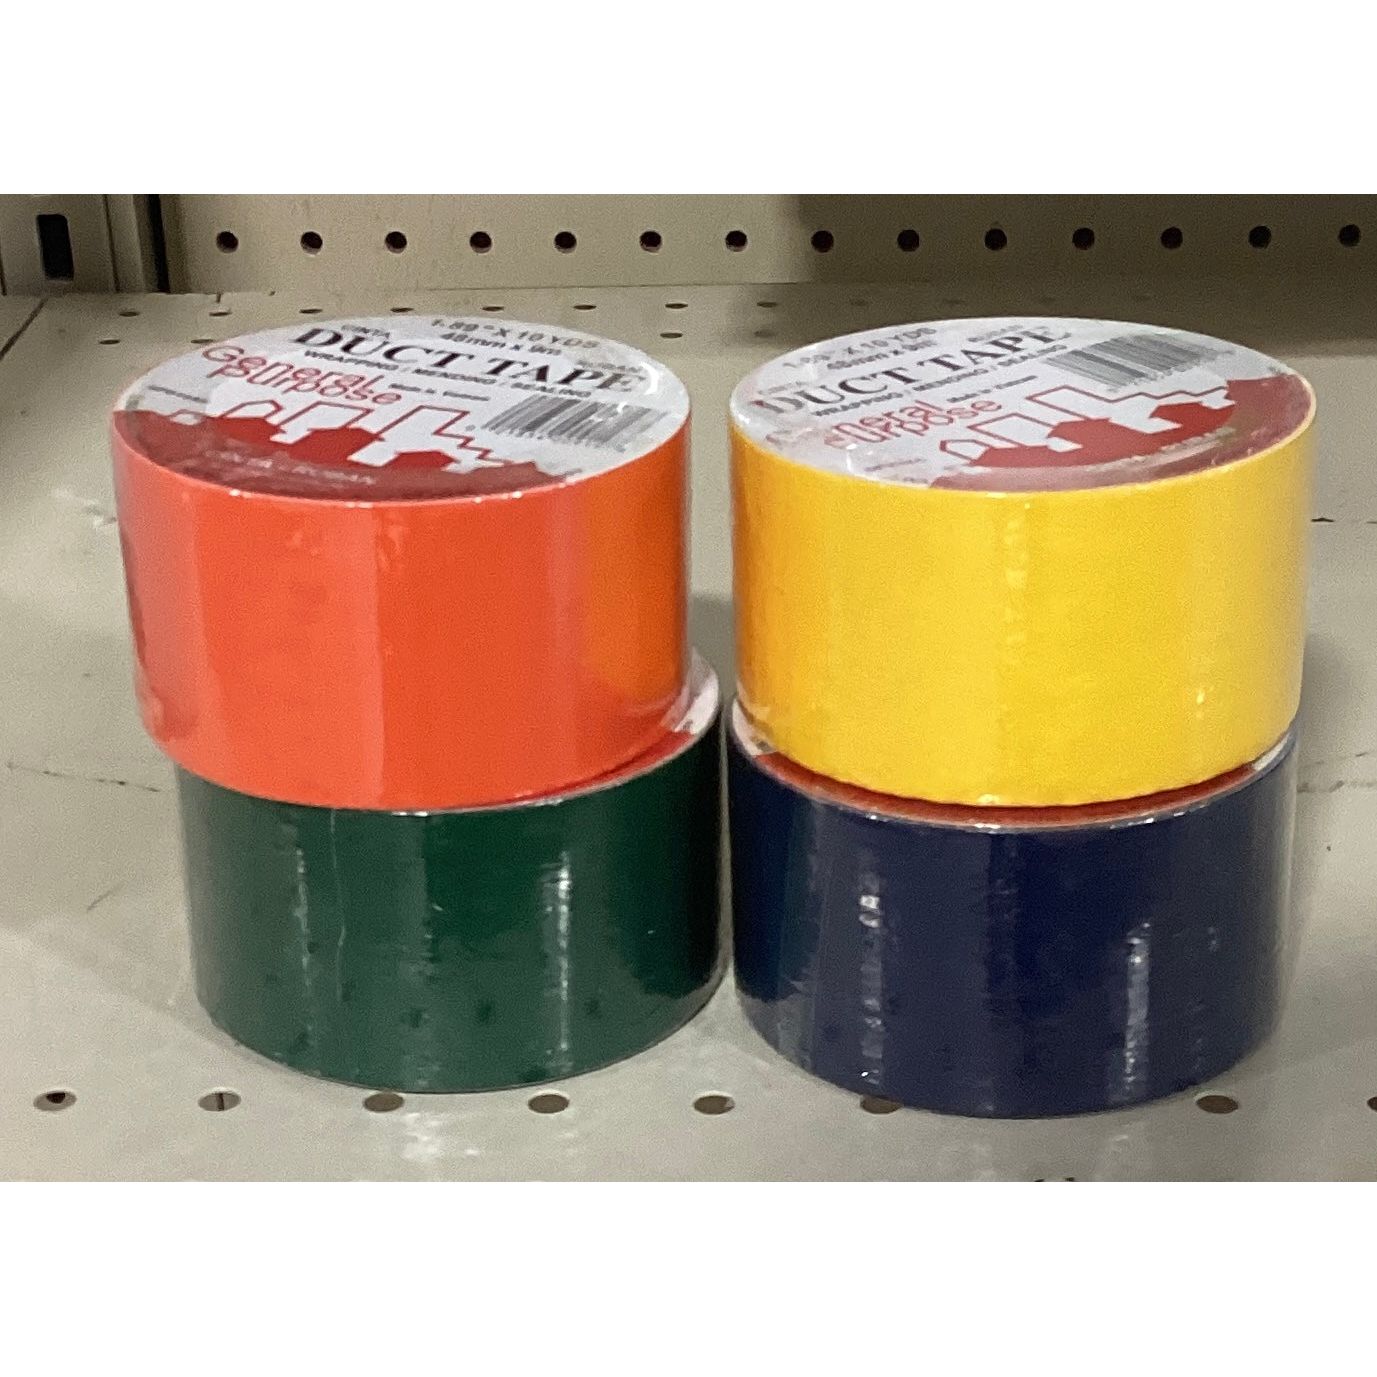 Four rolls of colored duct tape neatly arranged on a shelf.